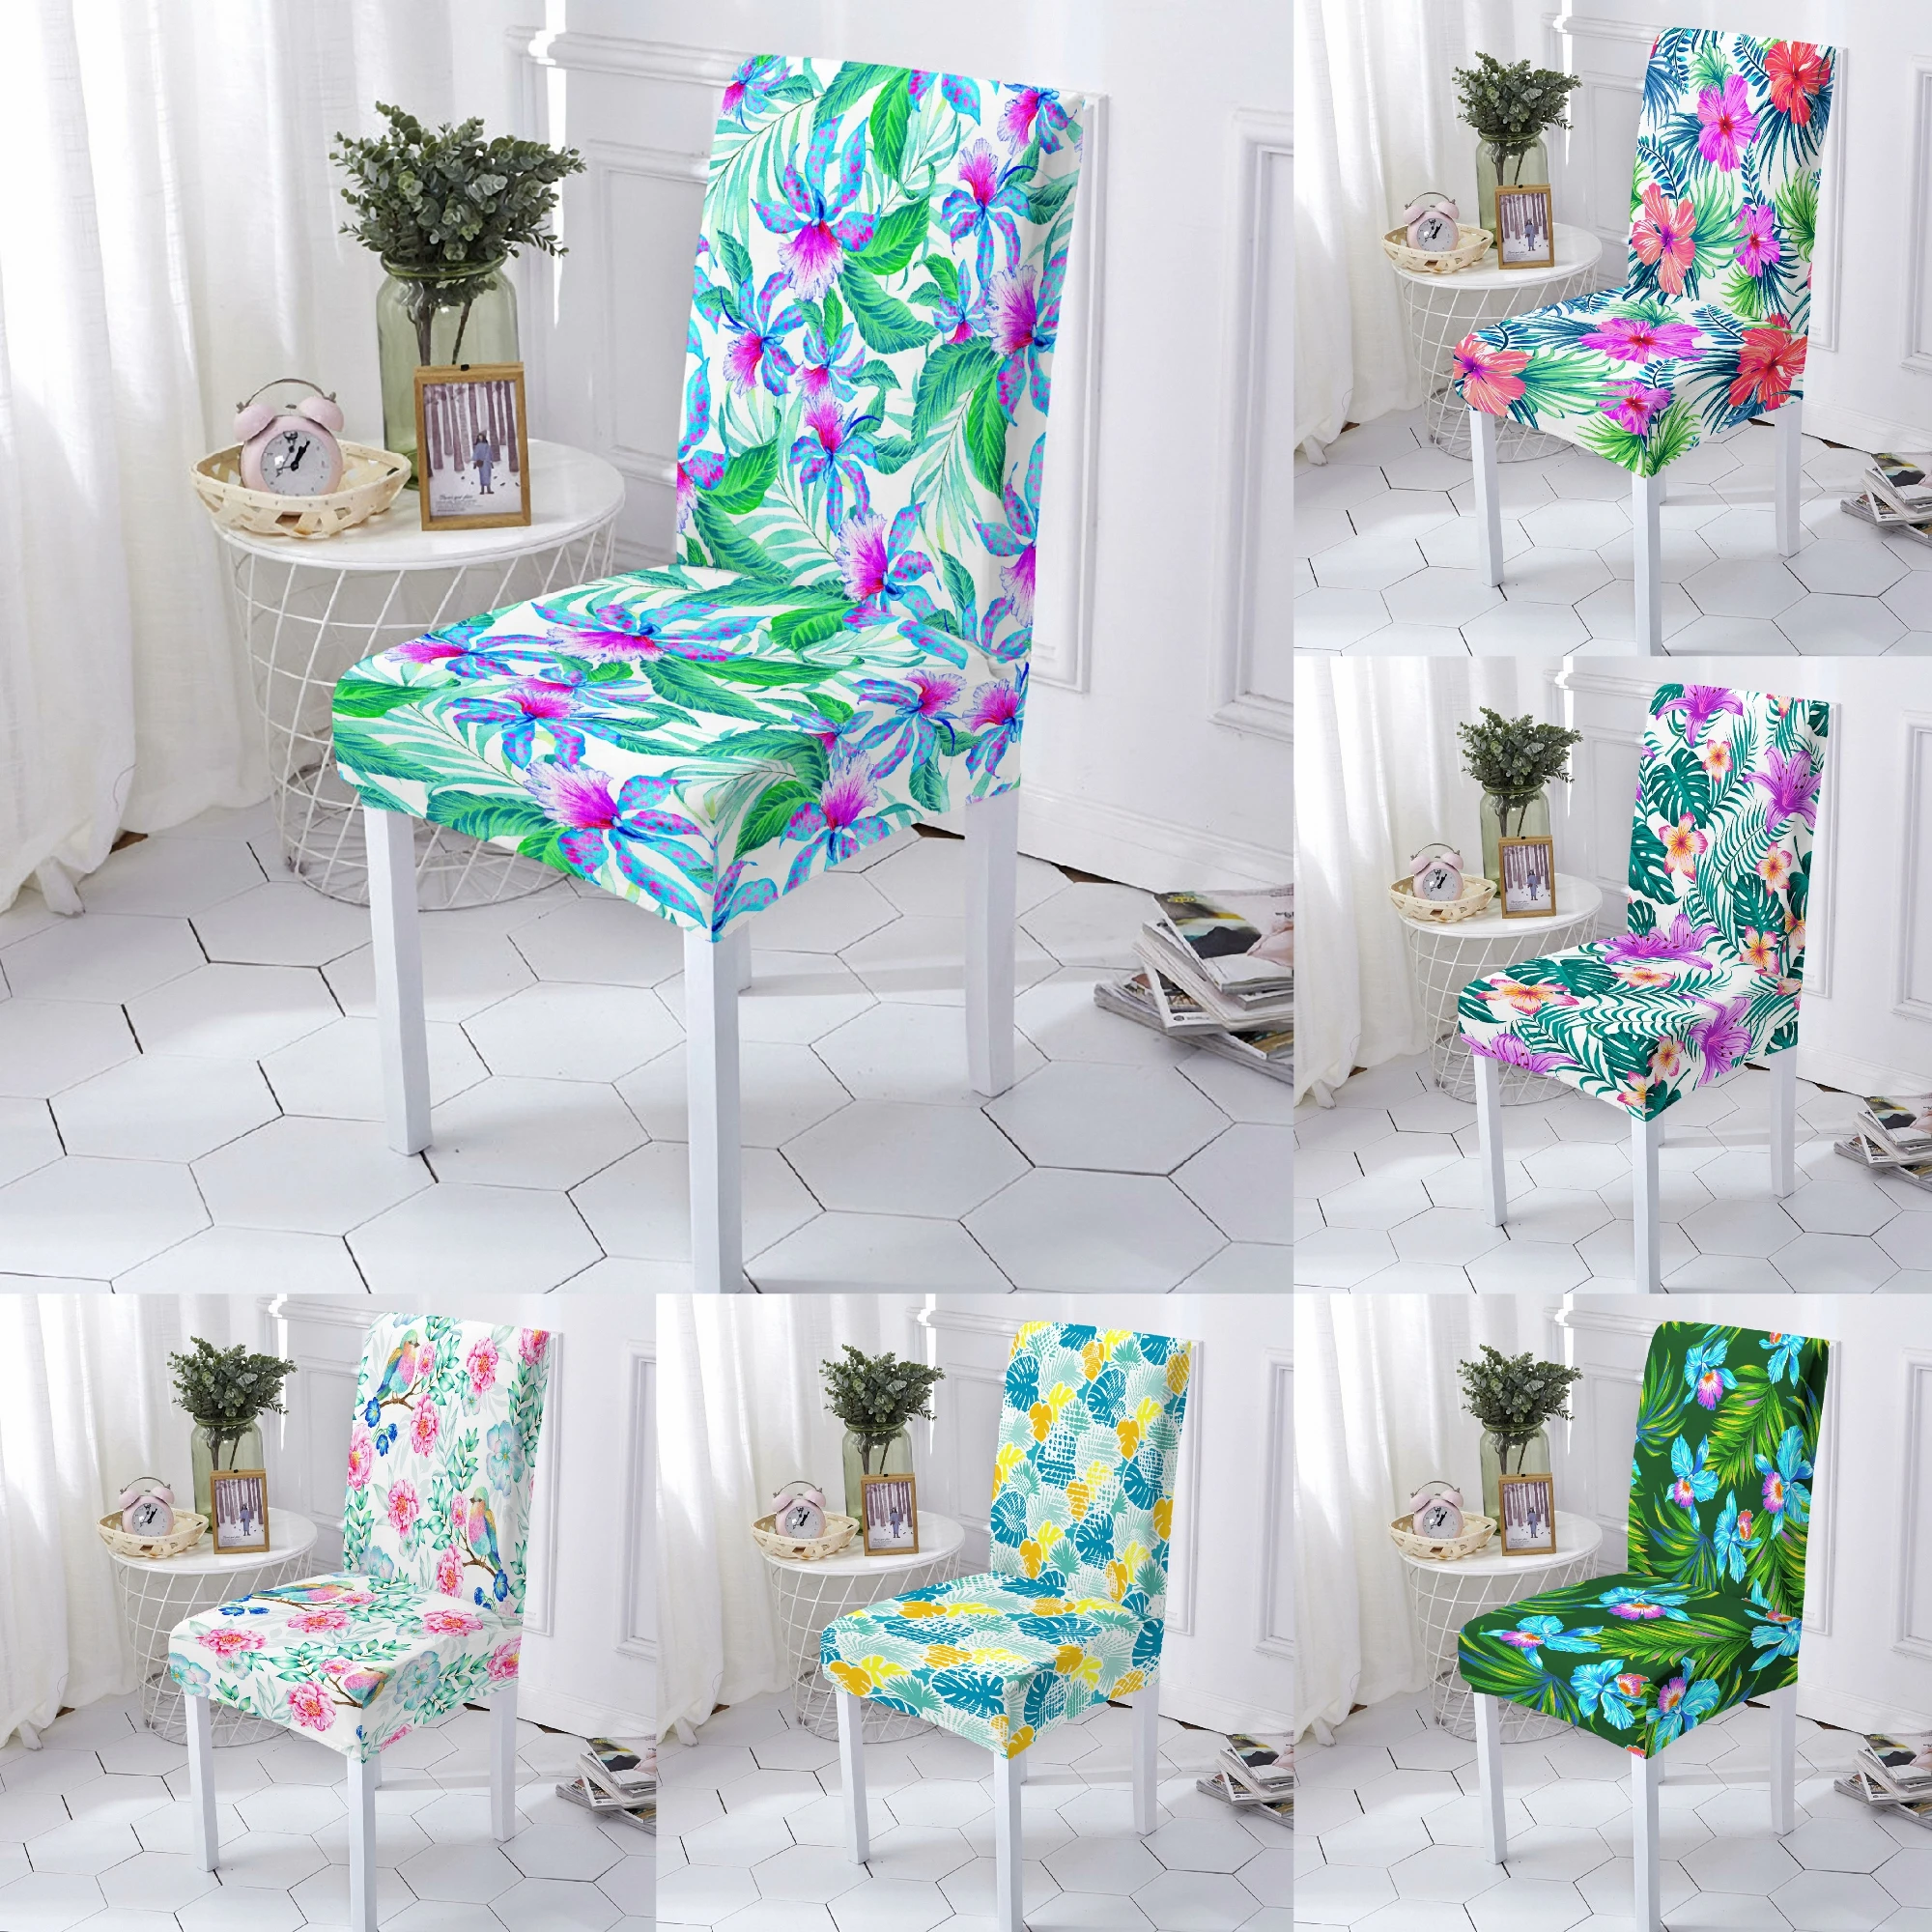 Flexible Stretch Spandex Chair Seat Covers Wedding Party Banquet Home Decor 